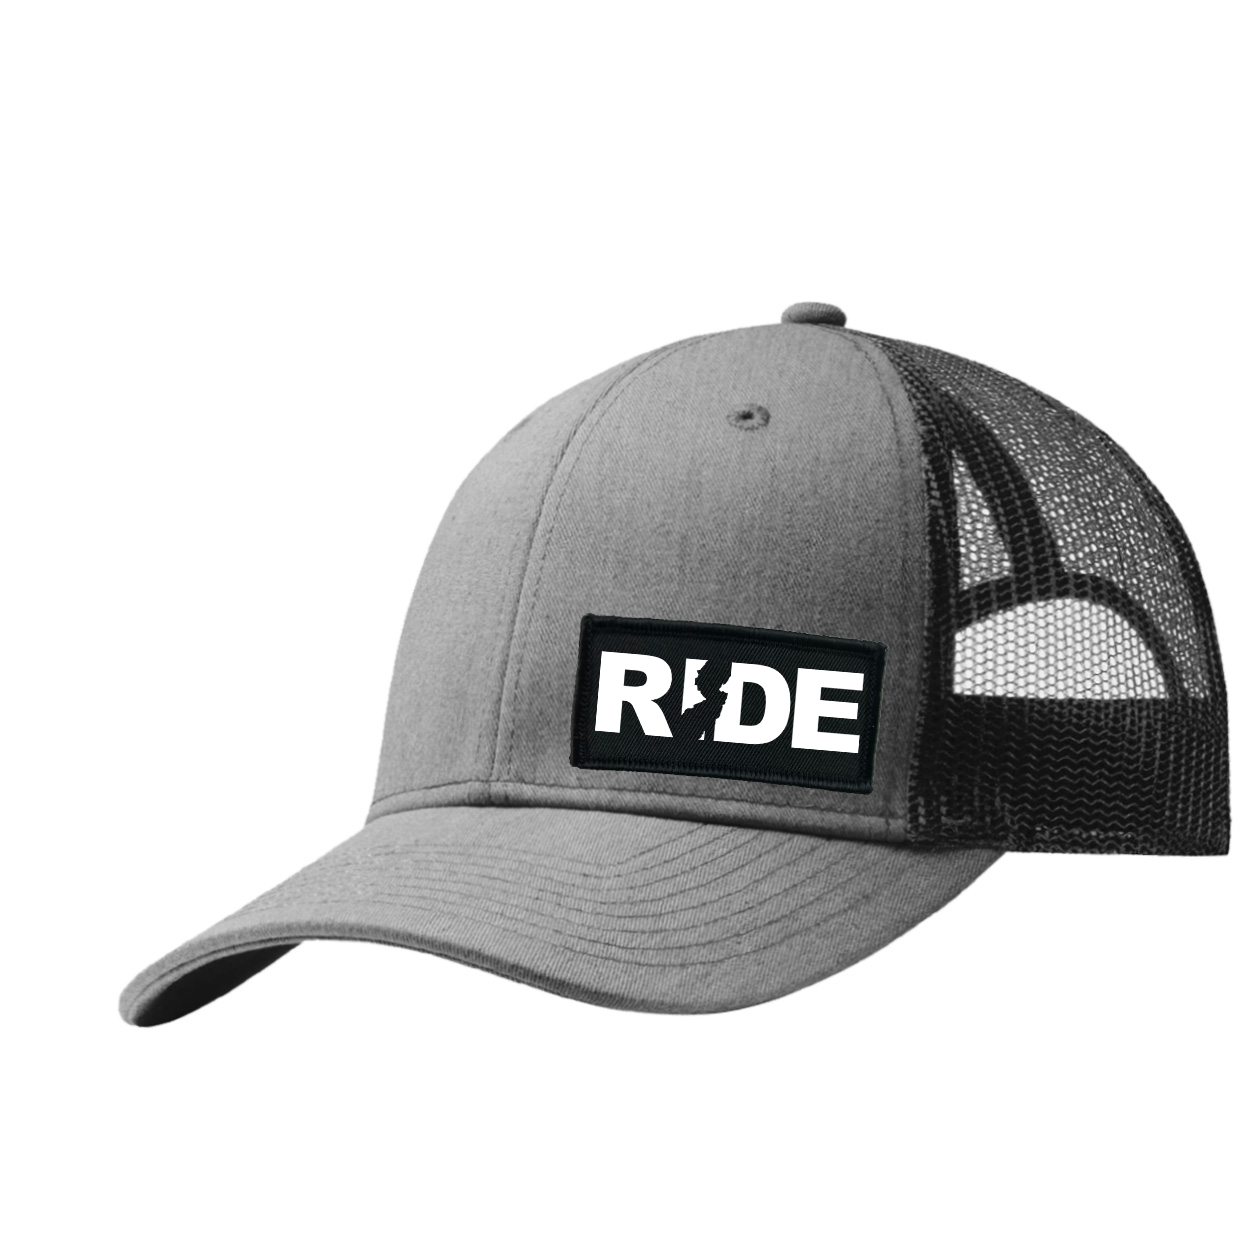 Ride New Jersey Night Out Woven Patch Snapback Trucker Hat Heather Gray/Black (White Logo)